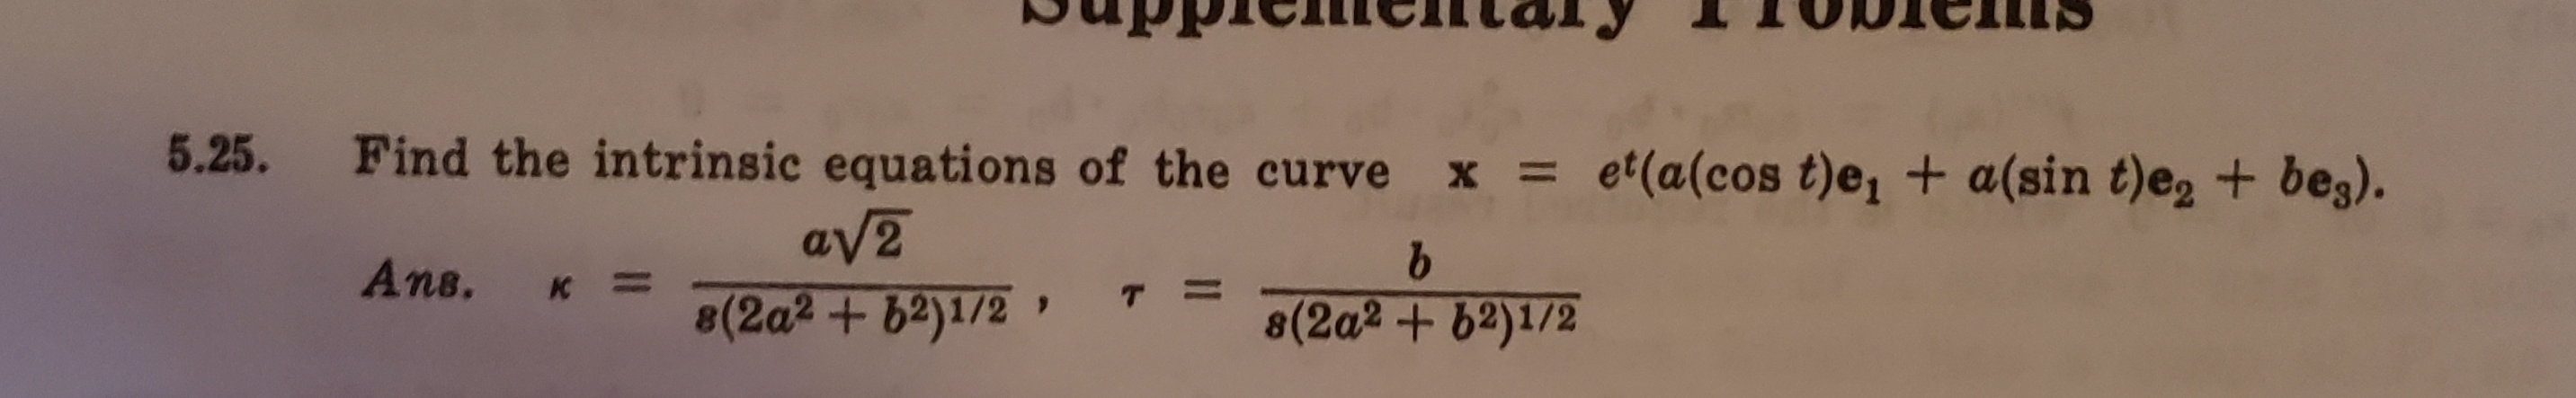 SppieCIltaly
Find the intrinsic equations of the curve x = e'(a(cos t)e, + a(sin t)e + bes).
5.25.
11
ανE
(2a2+ b2)1/2
Ans.
T
8(2a2+ 62)1/2
